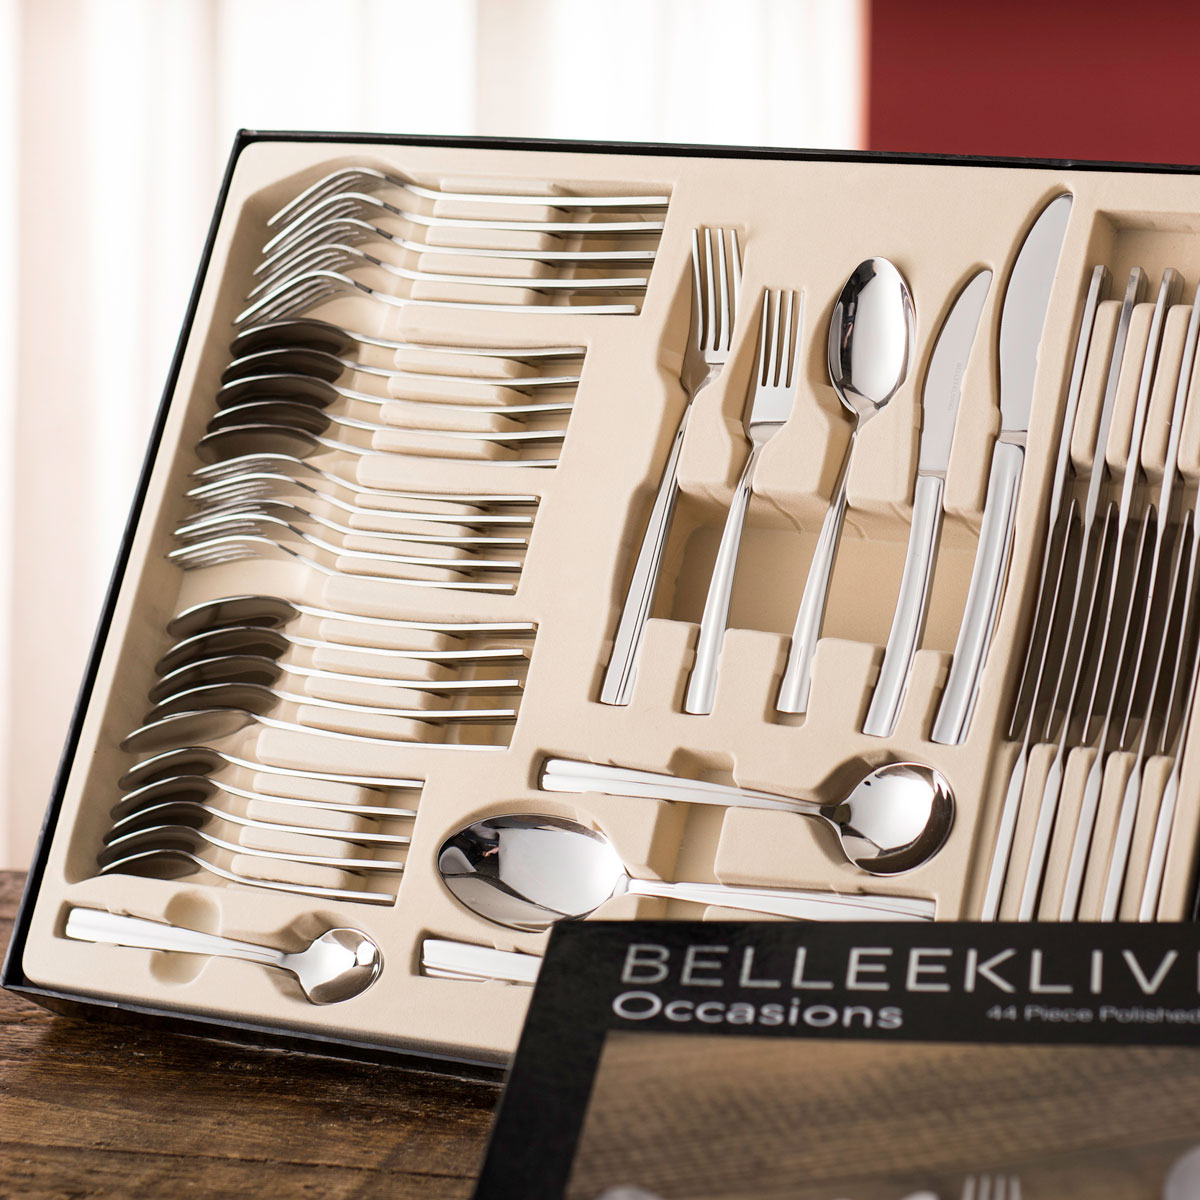 Stainless Steel Silver 20 x 30 x 10 cm Belleek Pottery Occasions 44 Piece Cutlery Set 